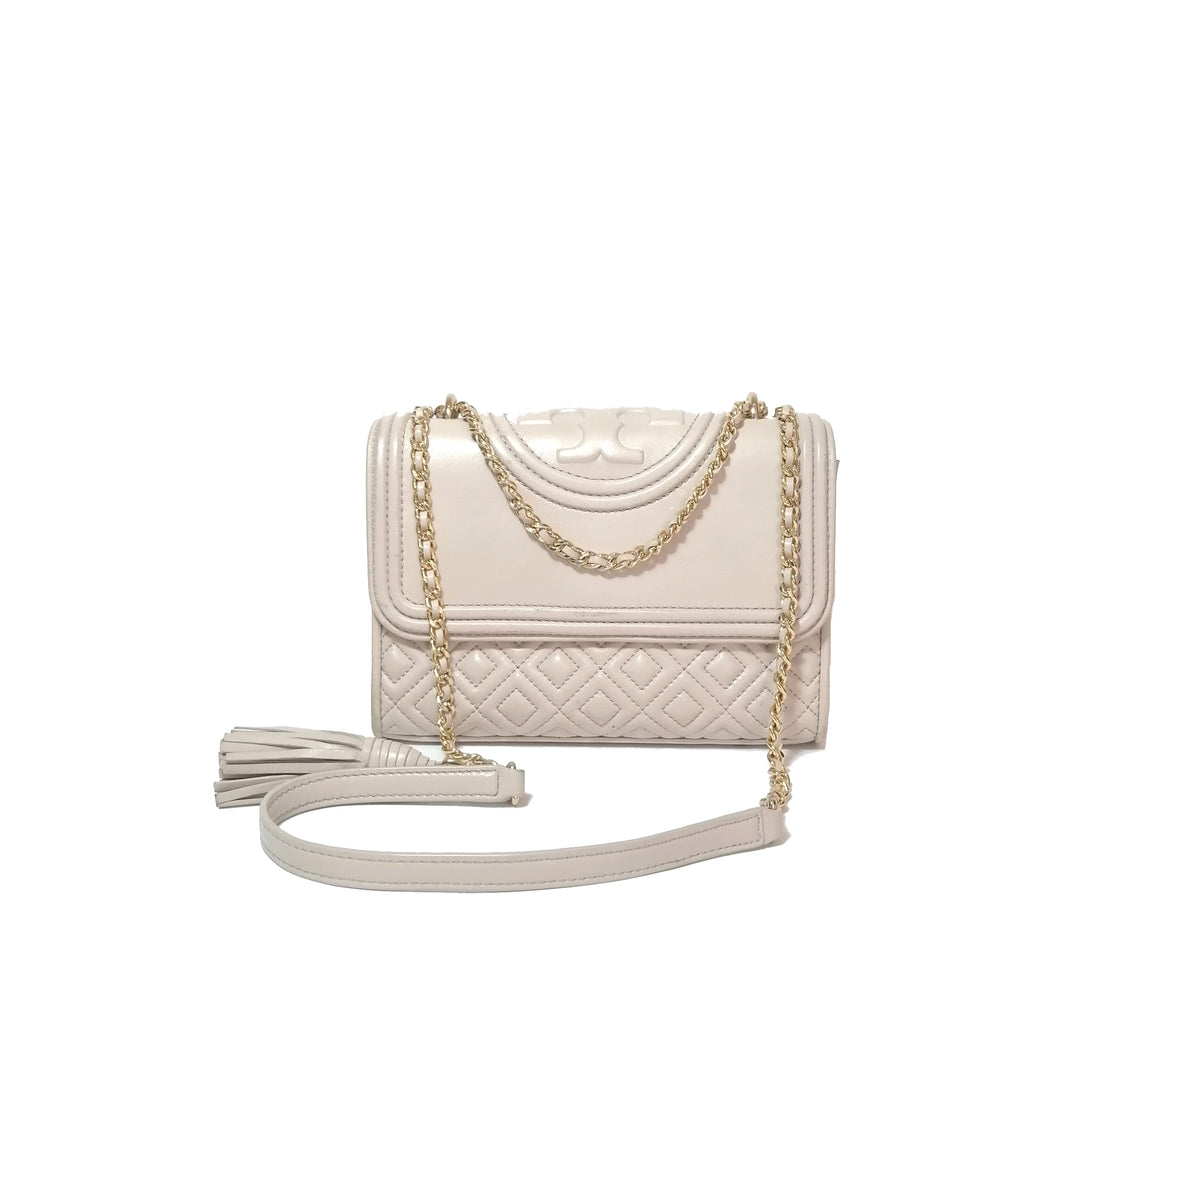 Tory Burch Fleming Convertible Shoulder Bag Leather in Bedrock pale pink